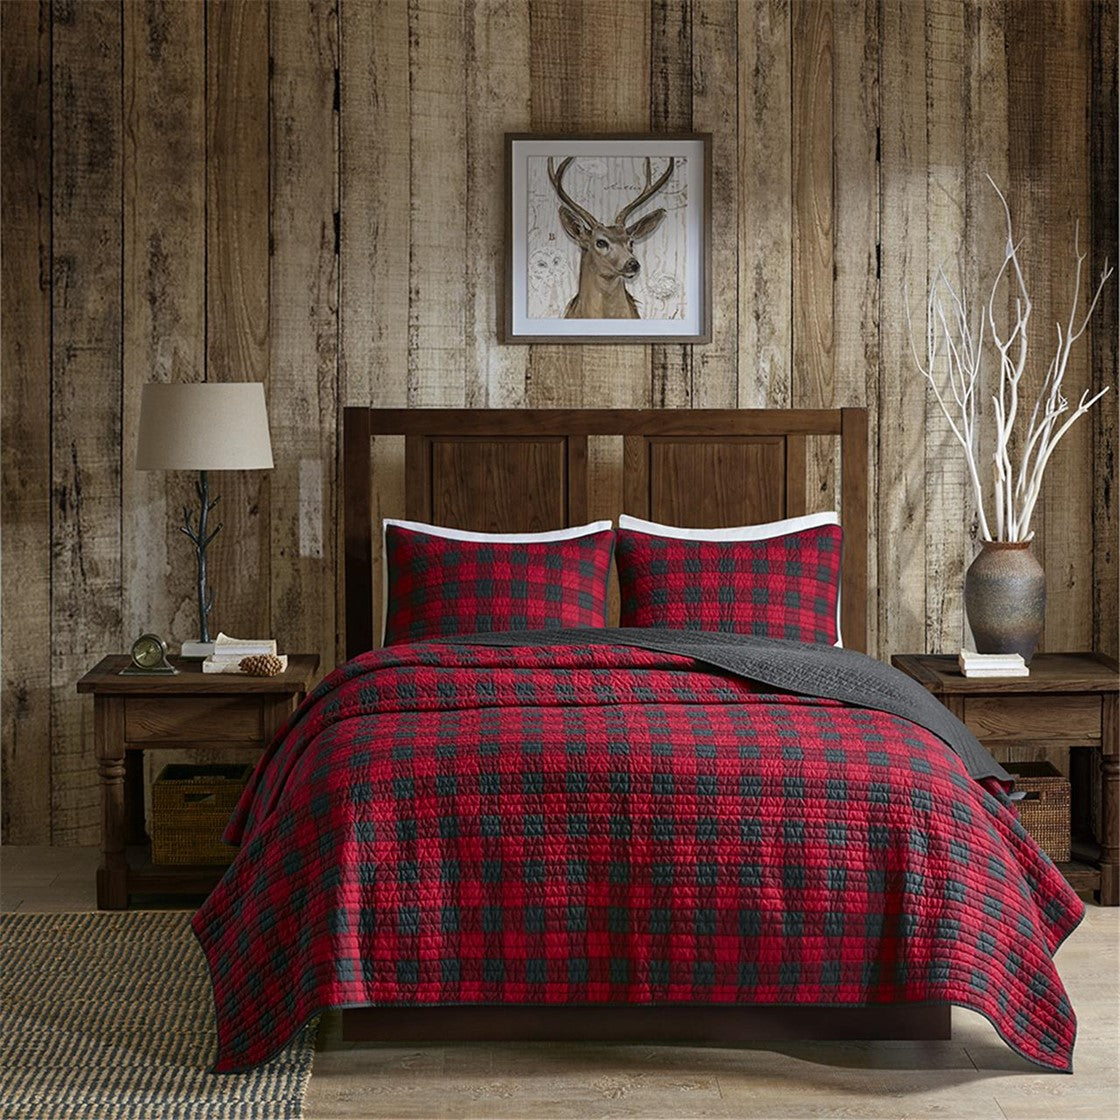 Woolrich Woolrich Check Oversized Quilt Mini Set - Red - Full Size / Queen Size